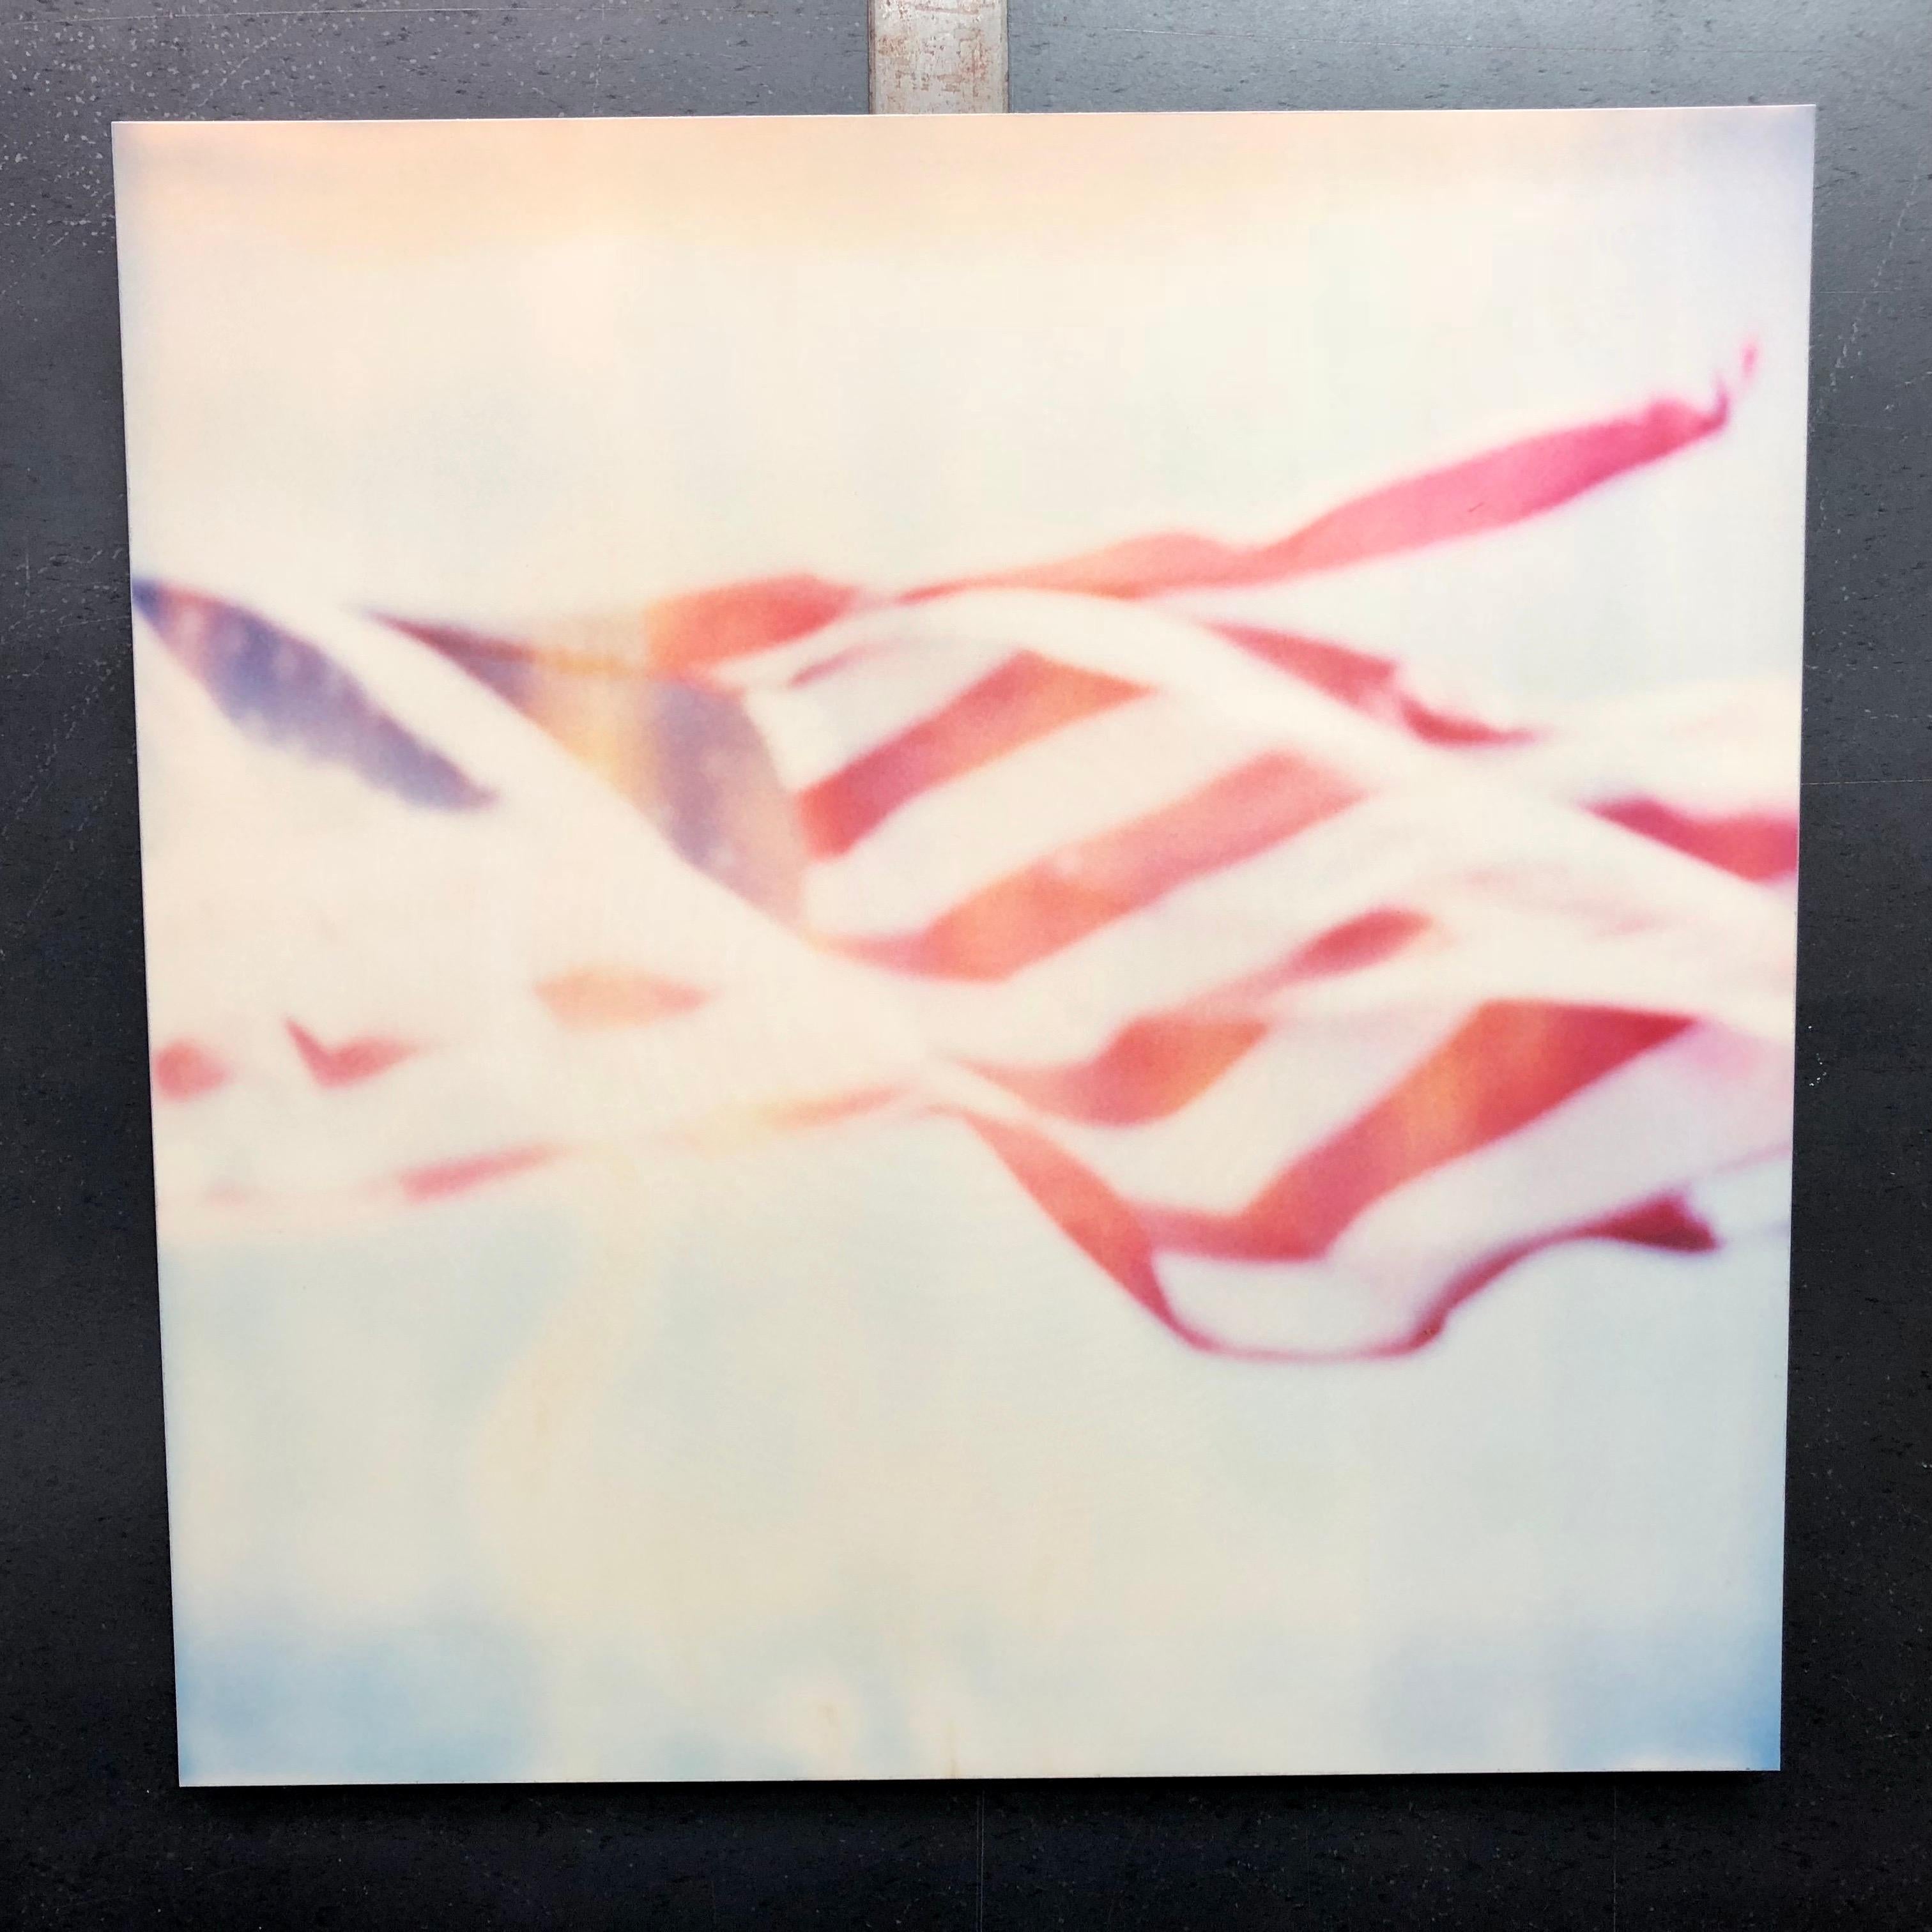 Primary Colors - Contemporary, Abstract, Landscape, USA, Polaroid, Flag For Sale 1